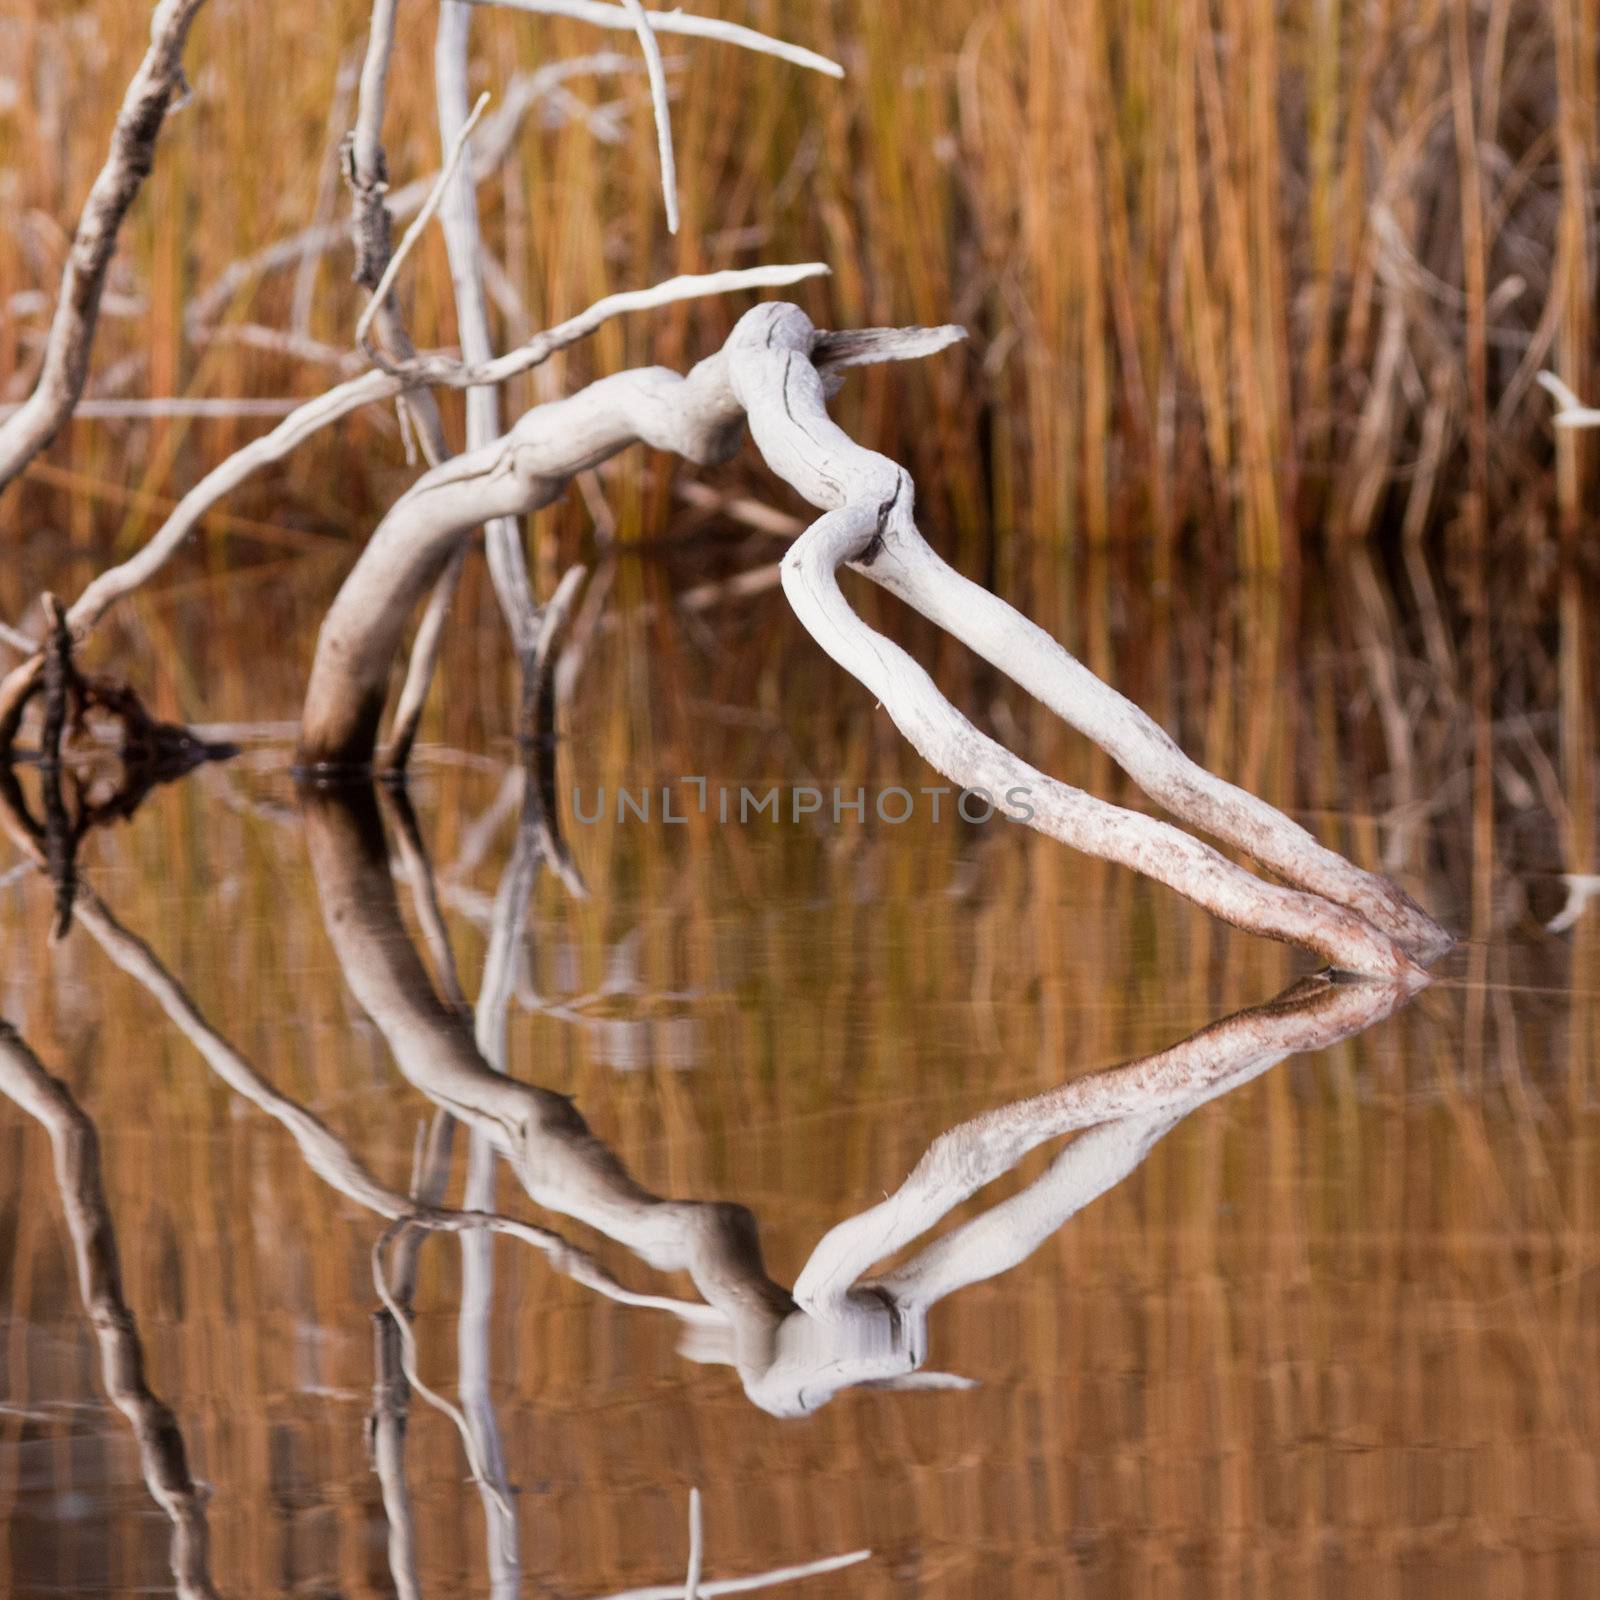 Weathered dead wood mirrored on calm water surface by PiLens